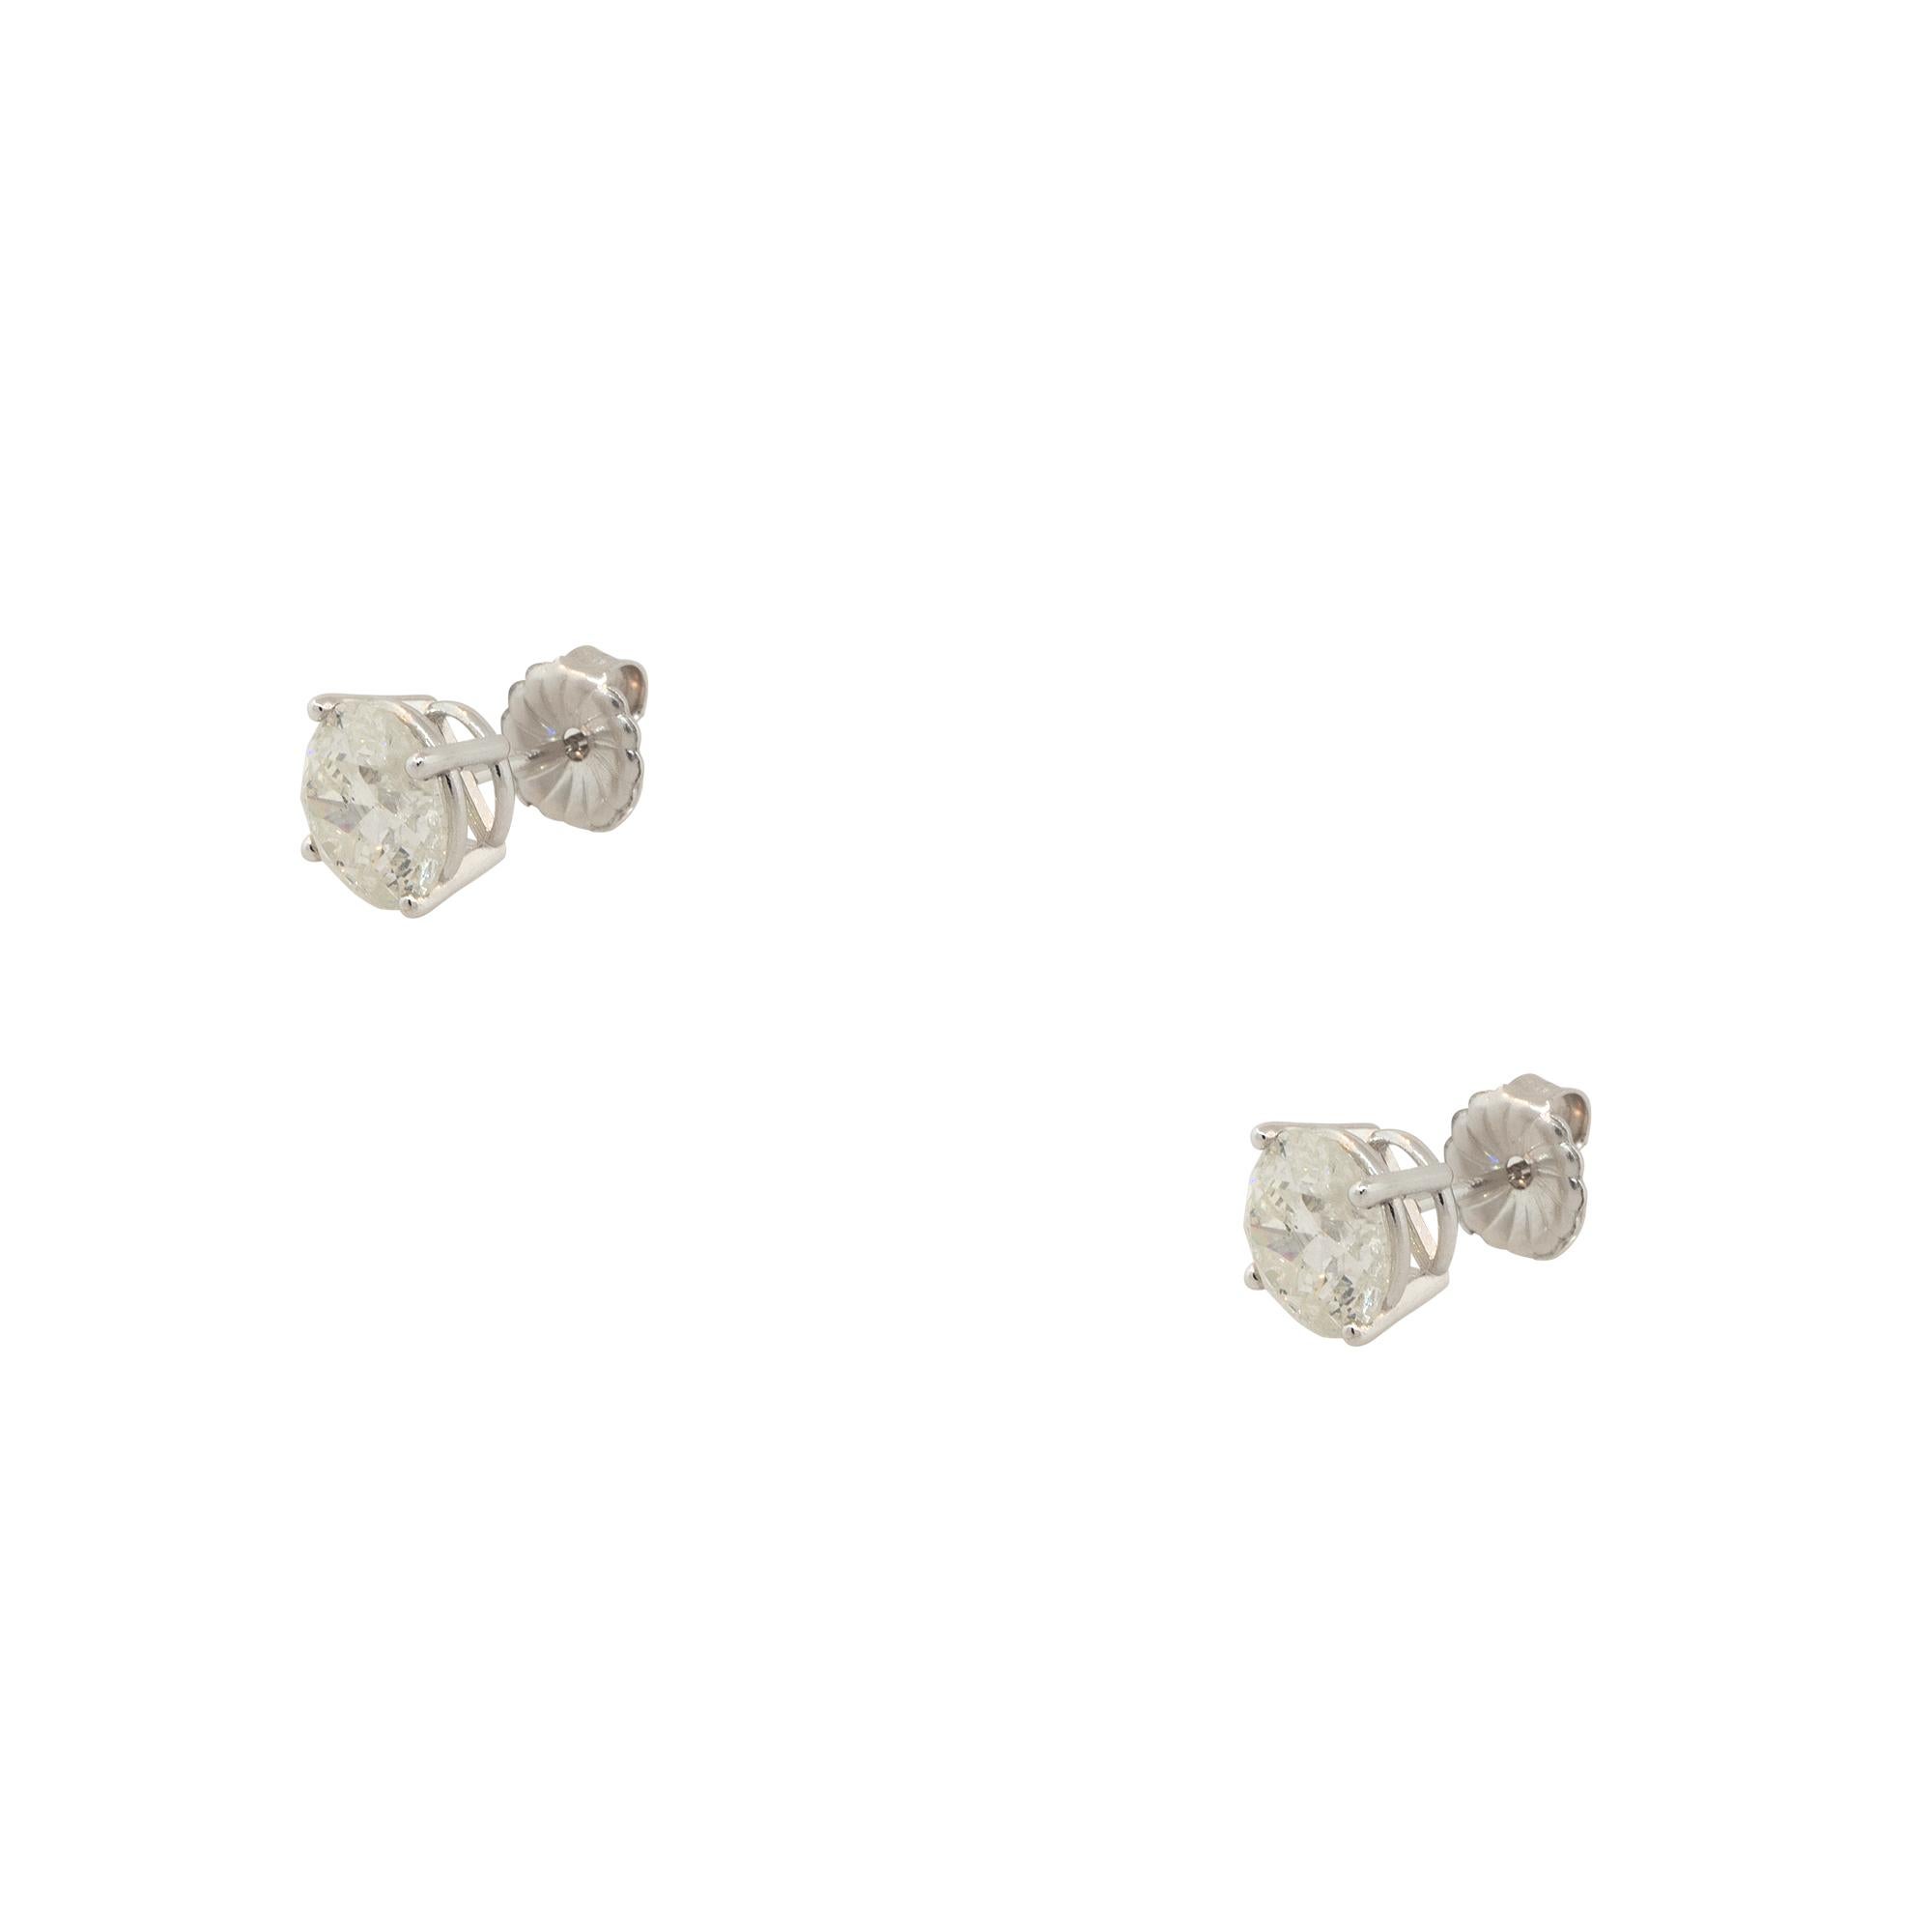 14k White Gold 4.31ctw Diamond Stud Earrings
Material: 14k White Gold
Diamond Details: Approx. 4.31ctw. of Diamonds. Diamonds are H in color and I1 in clarity
Earring Backs: Friction Backs
Additional Details: This item comes with a presentation